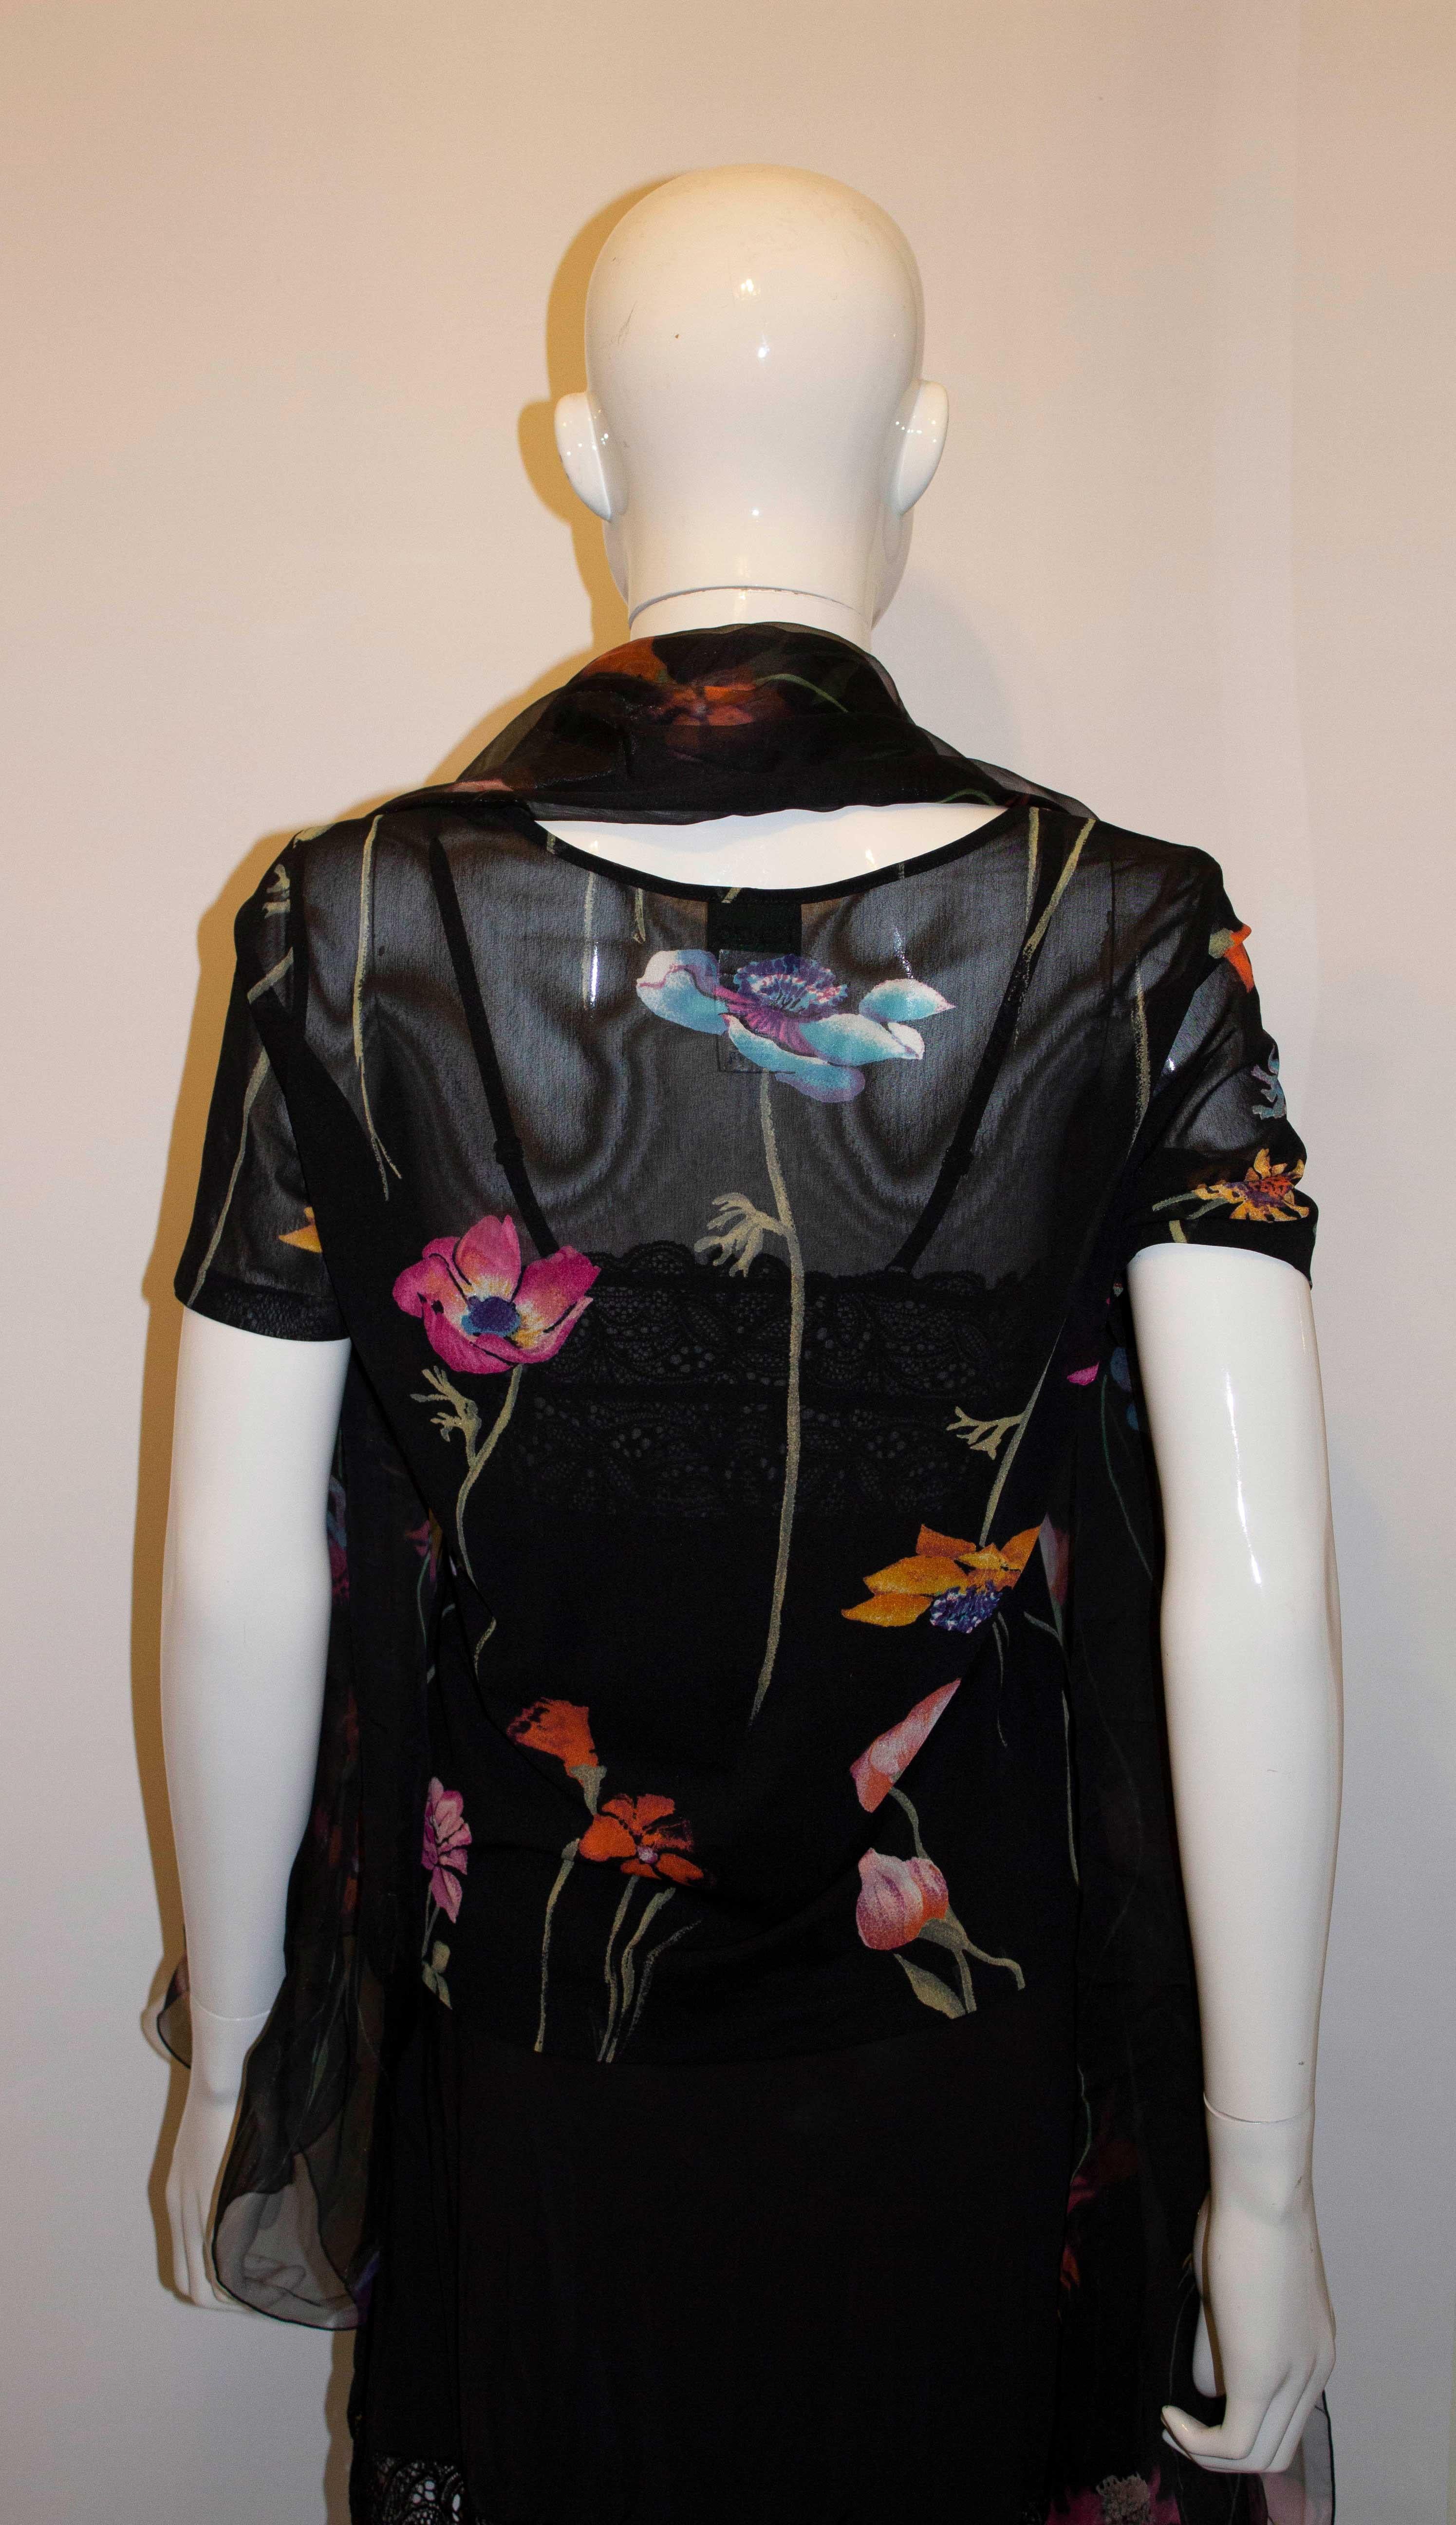 A pretty and easy to wear top by Kenzo with matching scarf. The top has a black background with floral print, and has a round neckline. Measurements: Bust 39'', length 42''. It has a matching scarf measuring 26'' x 69''